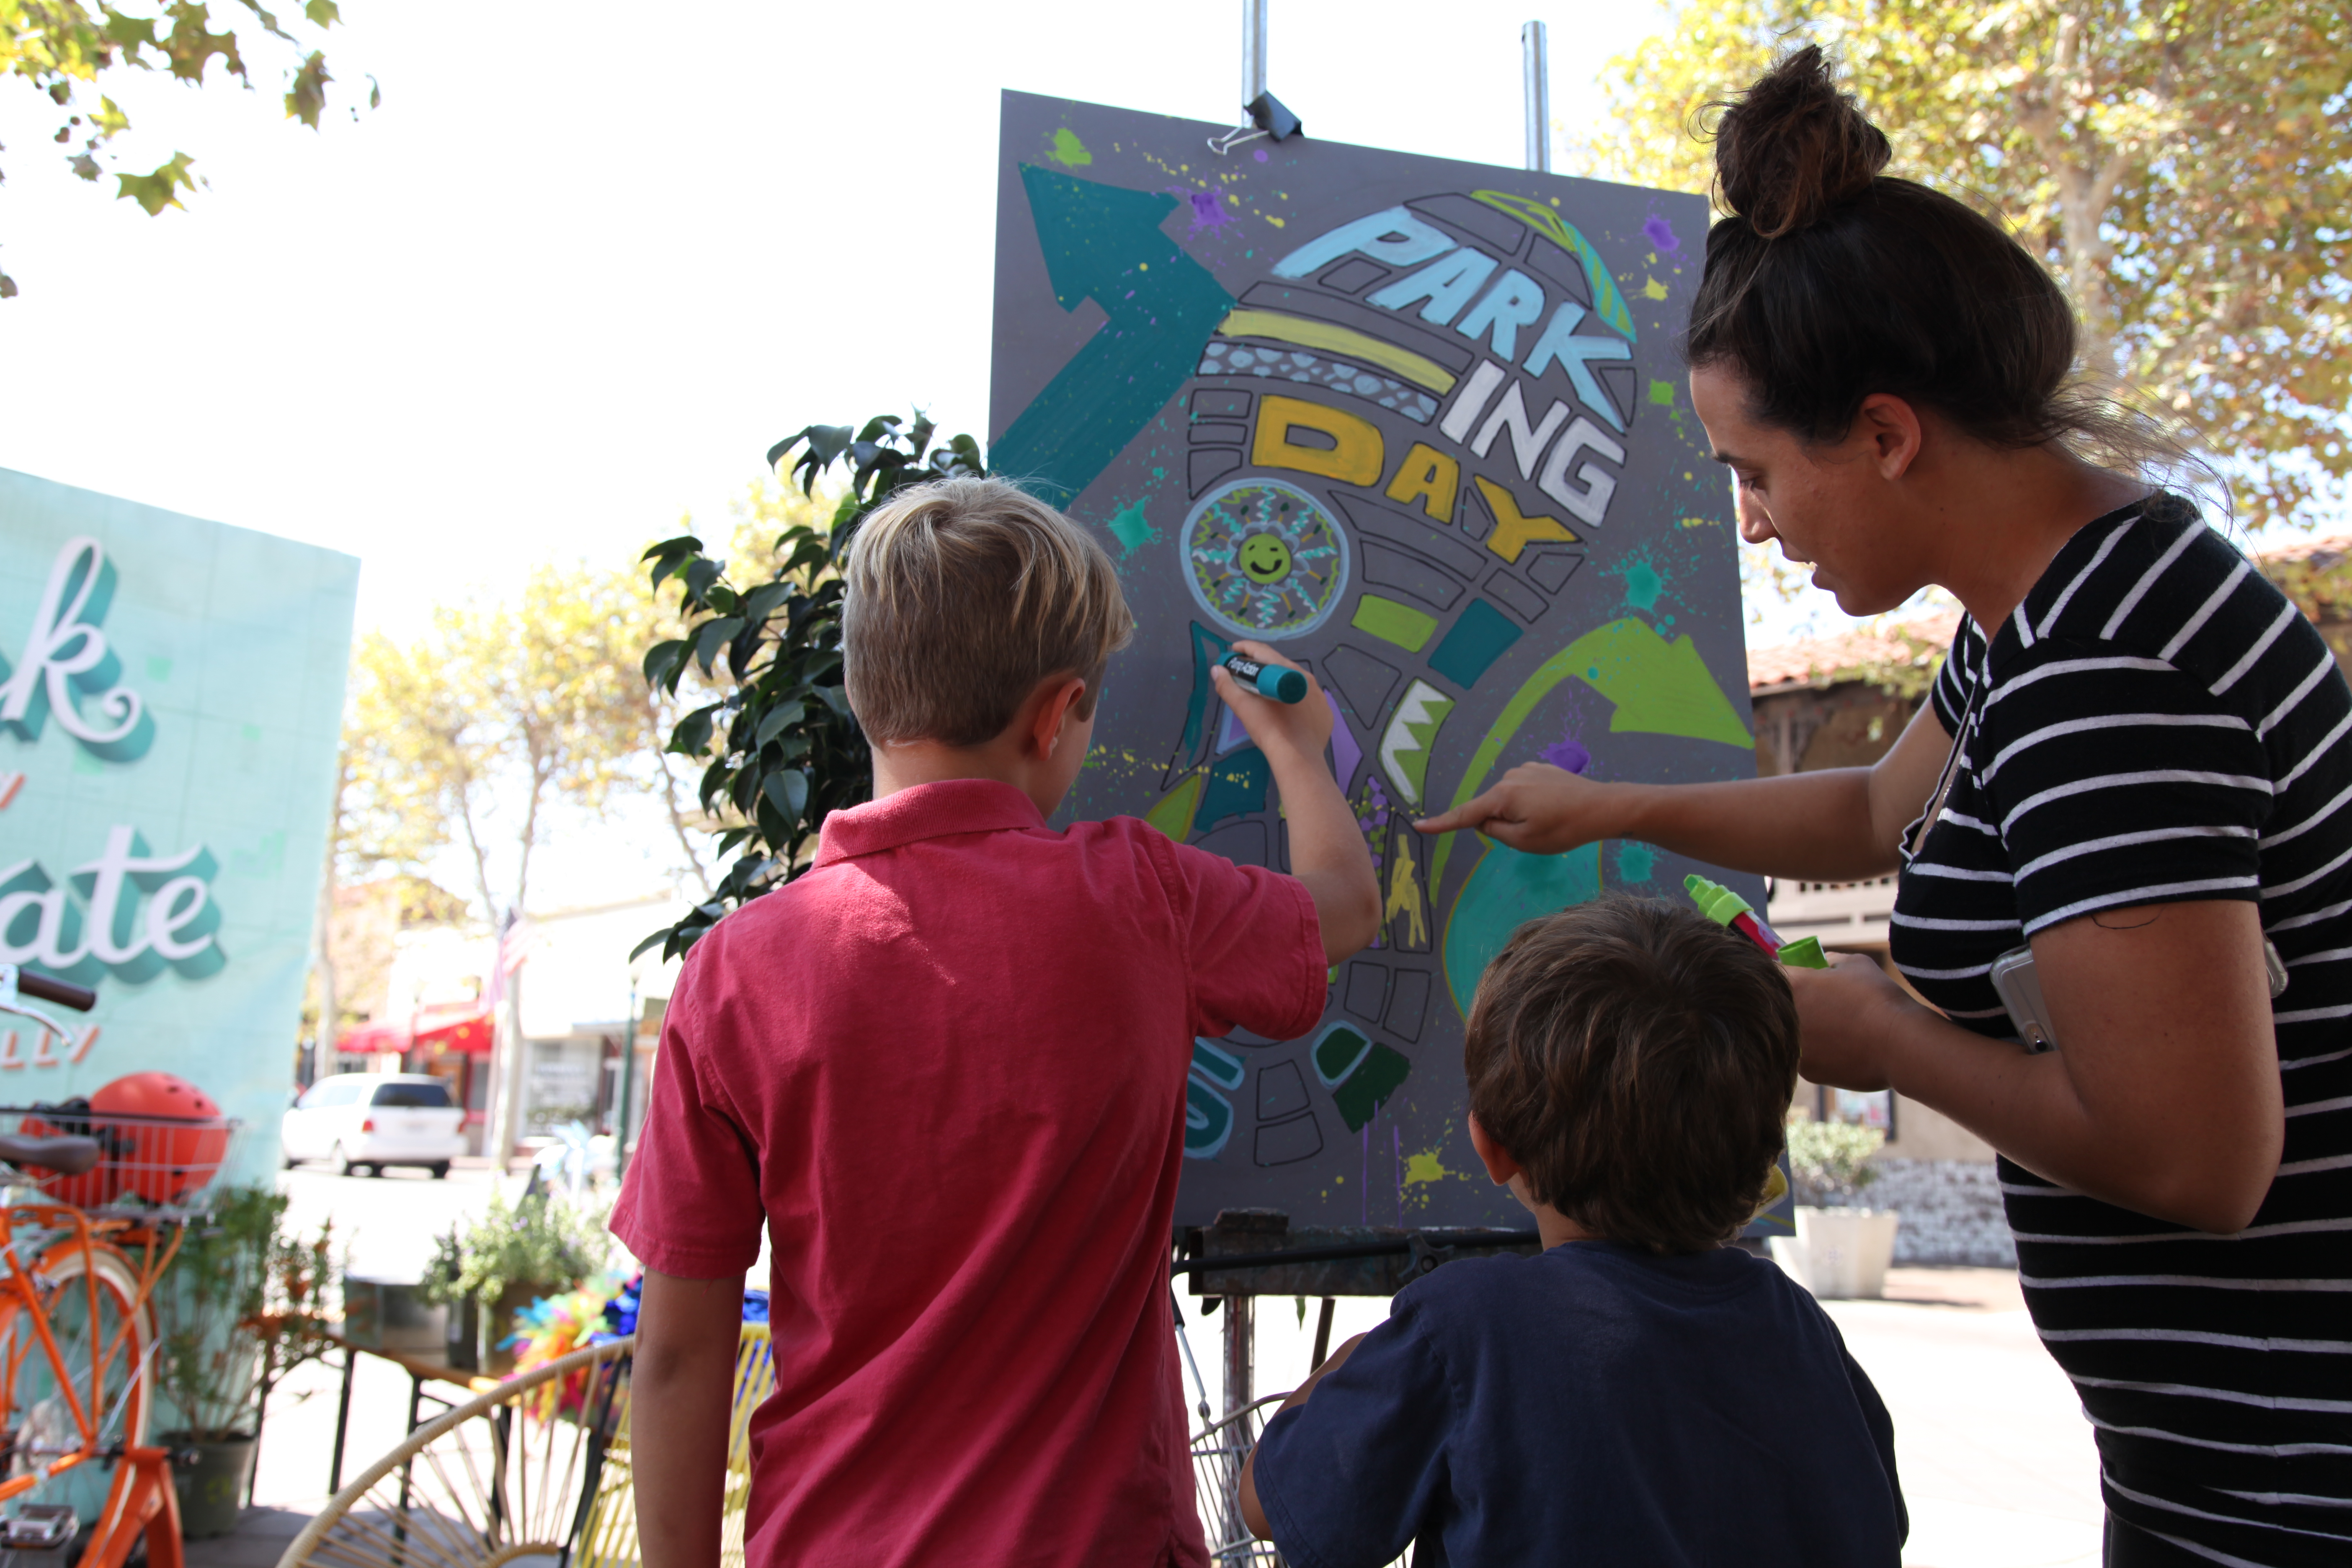 Krystin Gibson, 30, and her sons Nolan, 4, and Lynk, 7, draw on a community painting board at Orange County's Parking Day on September 17 in downtown Garden Grove. Photo by Kristopher Fortin